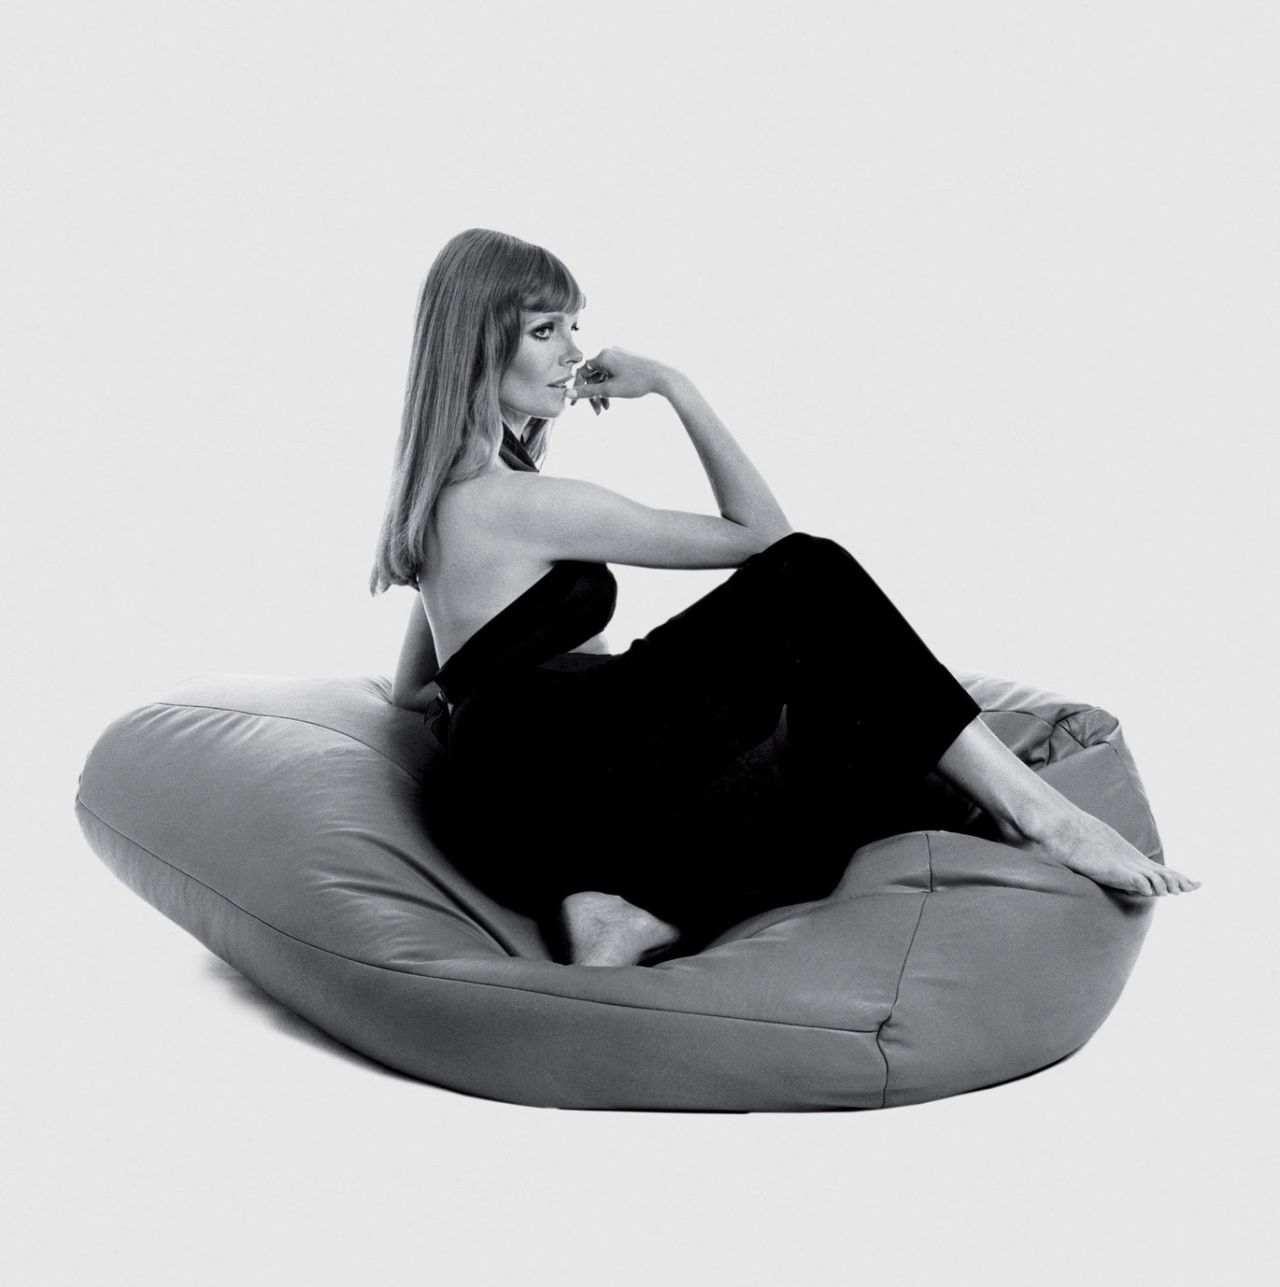 <em>Designed by Piero Gatti, Franco Teodoro, and Cesare Paolini in 1968</em>. From Italian radical design to a home near you, this was the original beanbag chair. It is a key example of how 1960s design experimentation came out of innovation in plastics technology. It was a time when people were completely rethinking the chair.